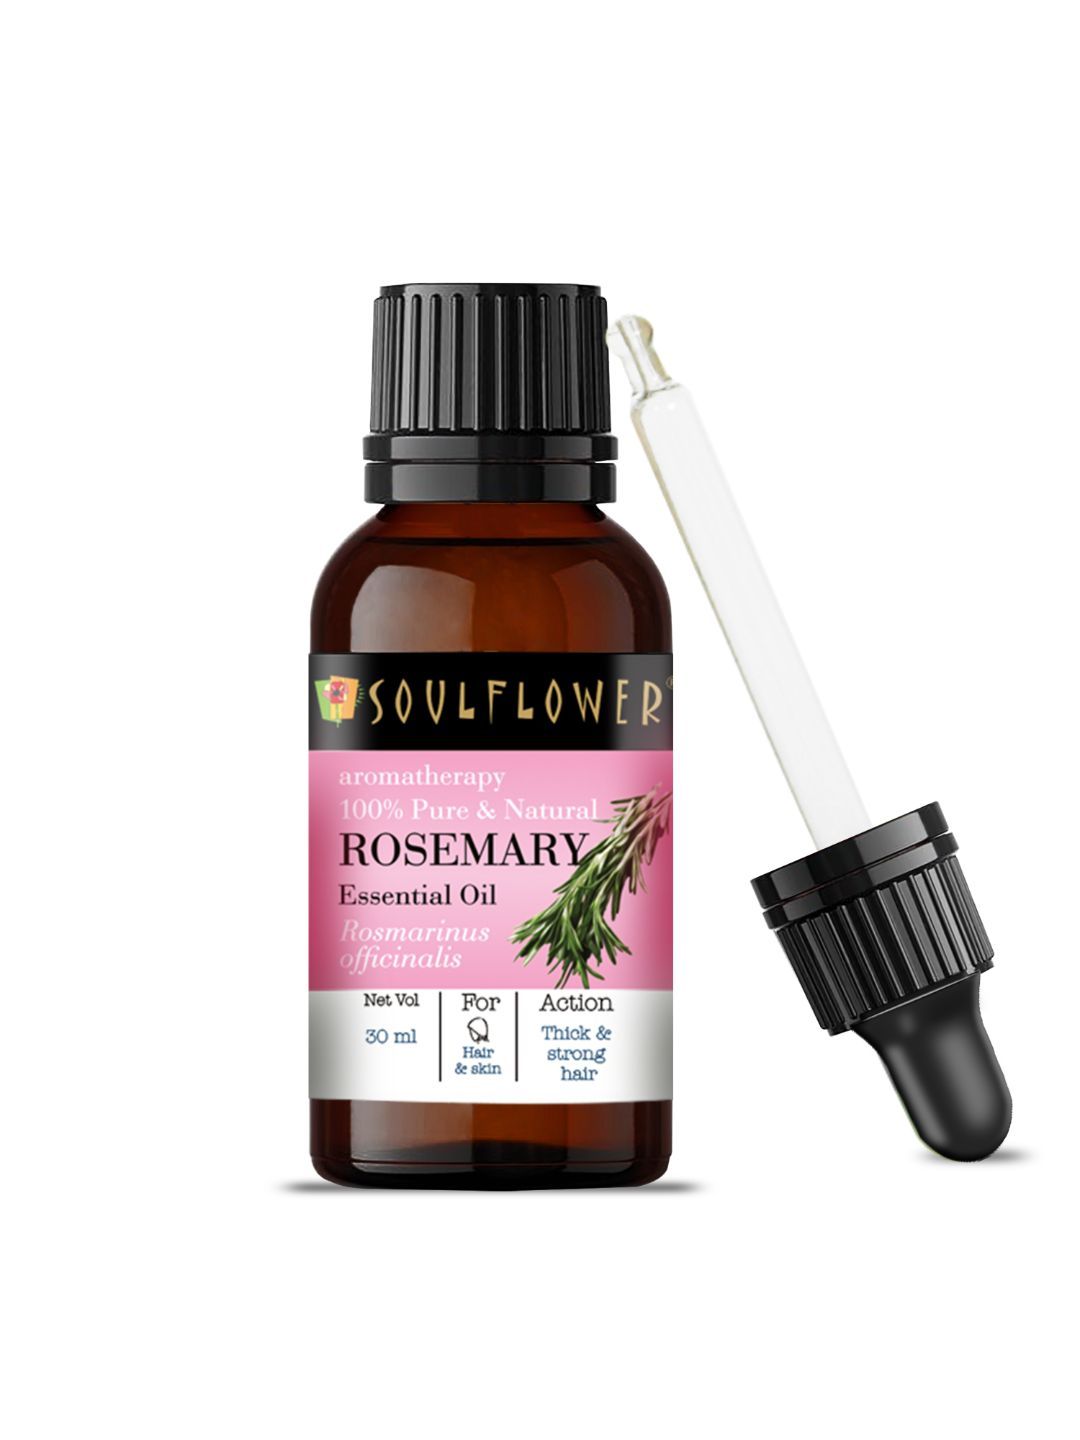 Soulflower Best Rosemary Essential Oil 100% Natural For Skin & Hair Growth & Shine - 30 ml Price in India